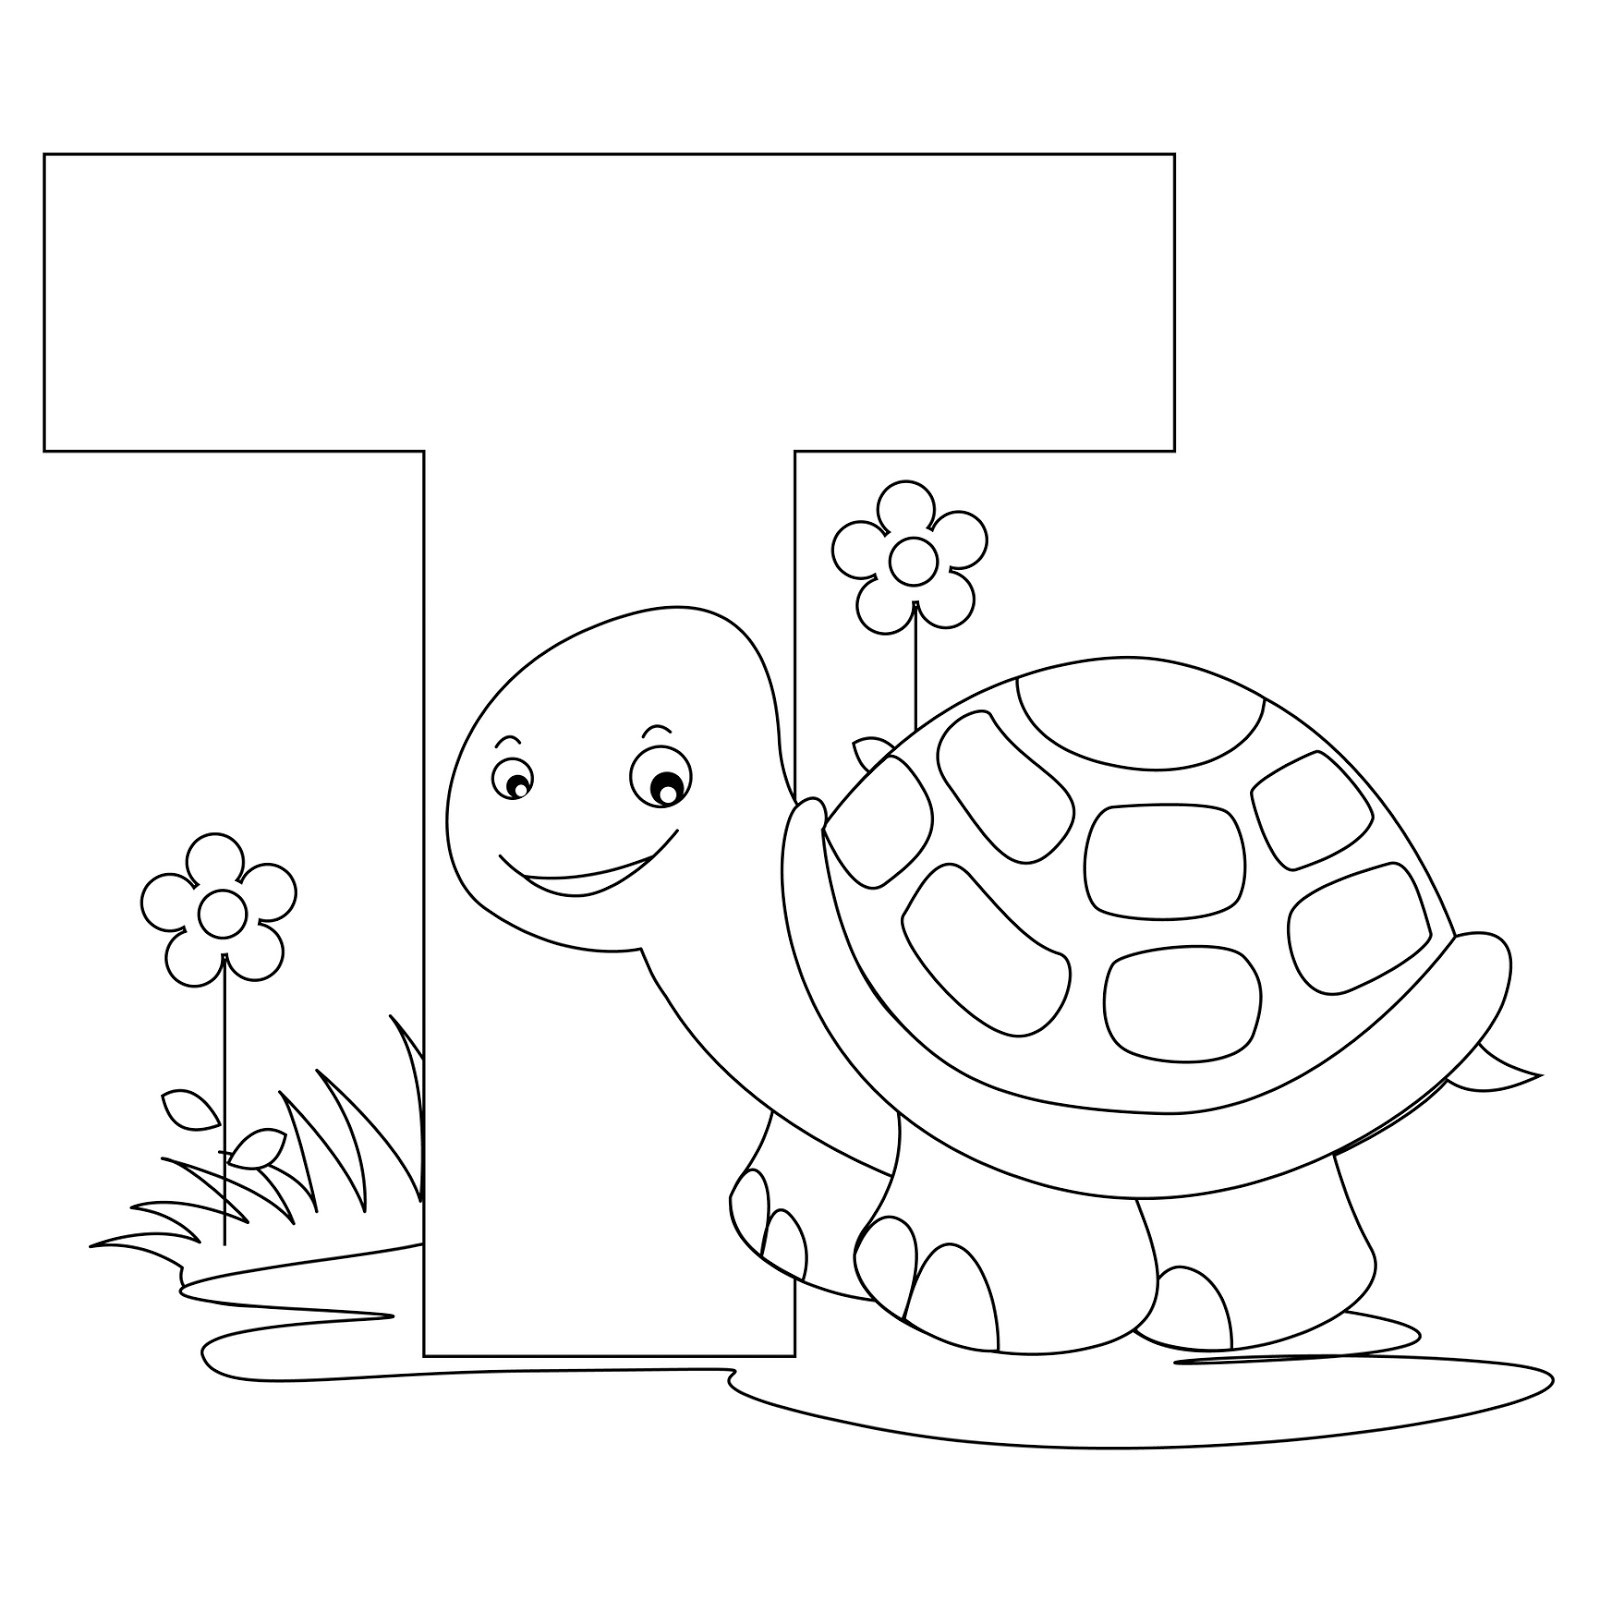 Letter A Coloring Pages For Toddlers
 Animal Alphabet Letter T coloring Turtle coloring